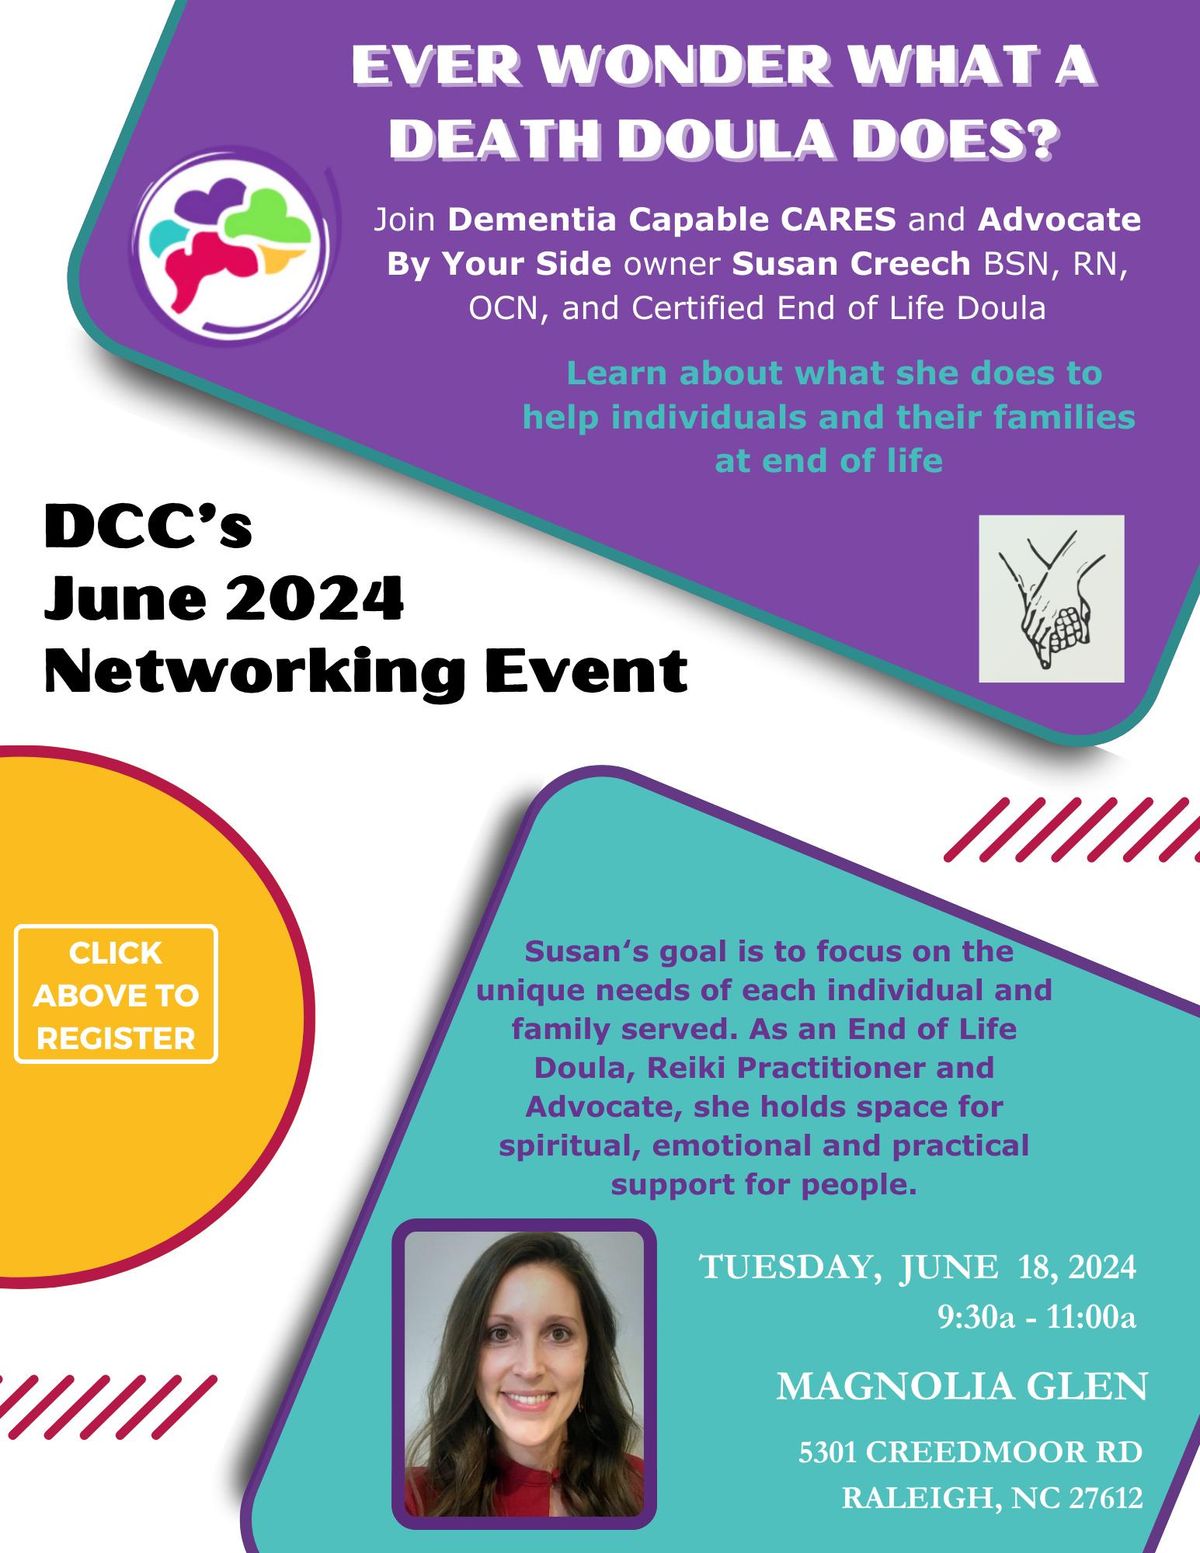 Dementia Capable CARES June 2024 Educational & Networking Event!